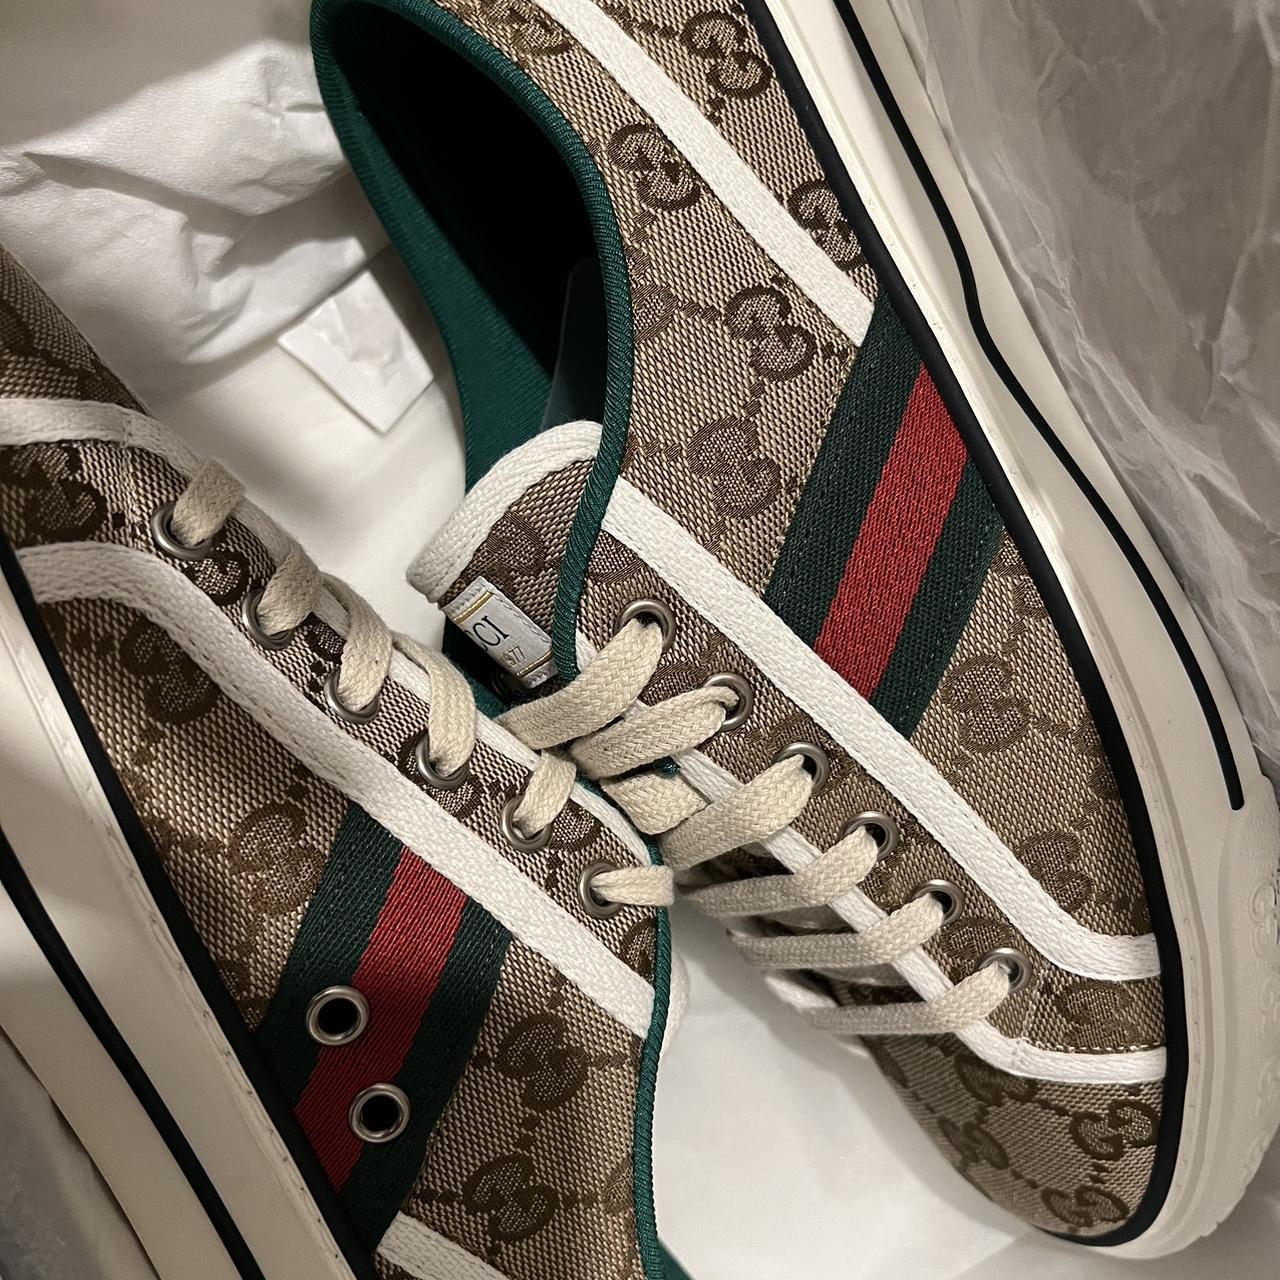 never worn gucci tennis shoes selling because they... - Depop